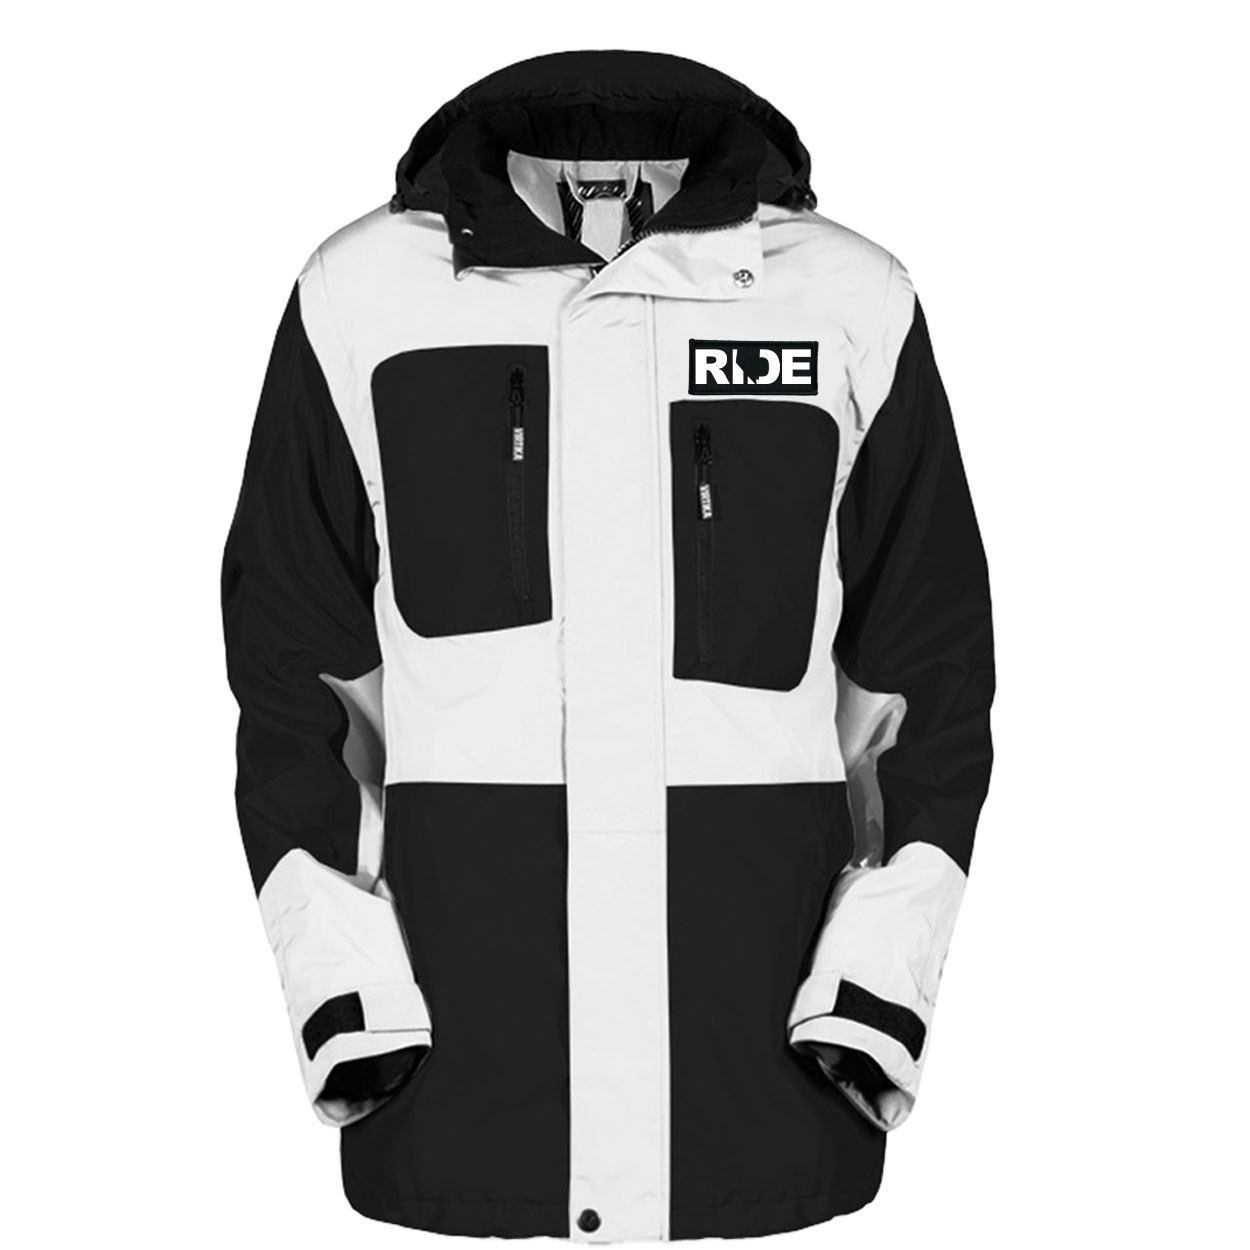 Ride Nevada Classic Woven Patch Pro Snowboard Jacket (Black/White)